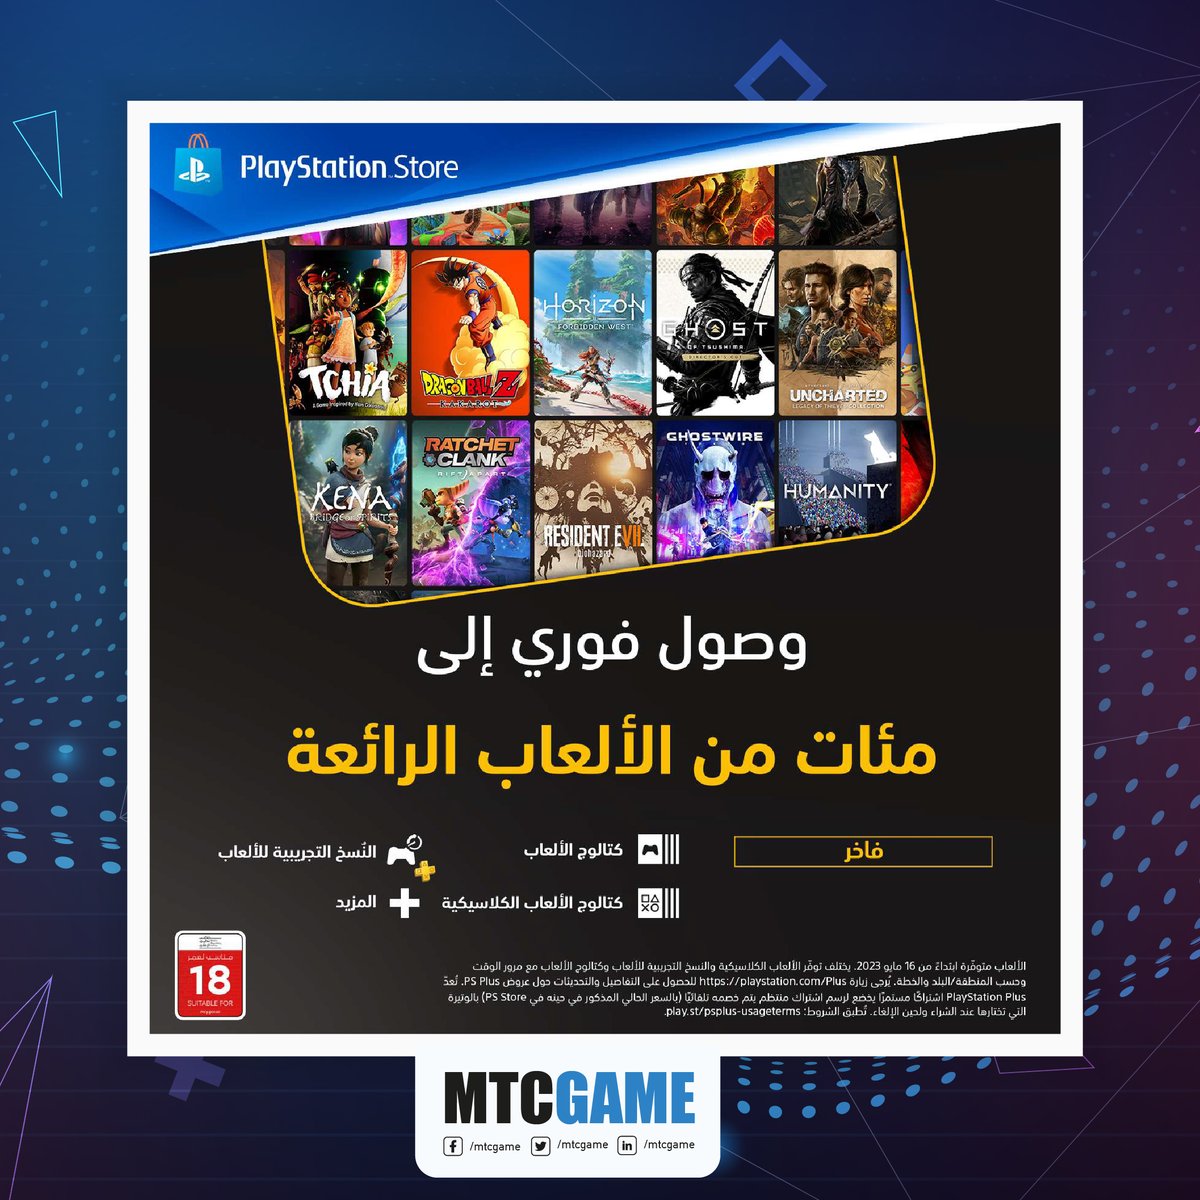 🌟 Big news! 🎮 MTCGAME now offers exciting POSM for PlayStation Plus. We've got the official assets from Sony PlayStation! Get ready to level up! #MTCGAME #PlayStationPlus #GamingExcitement